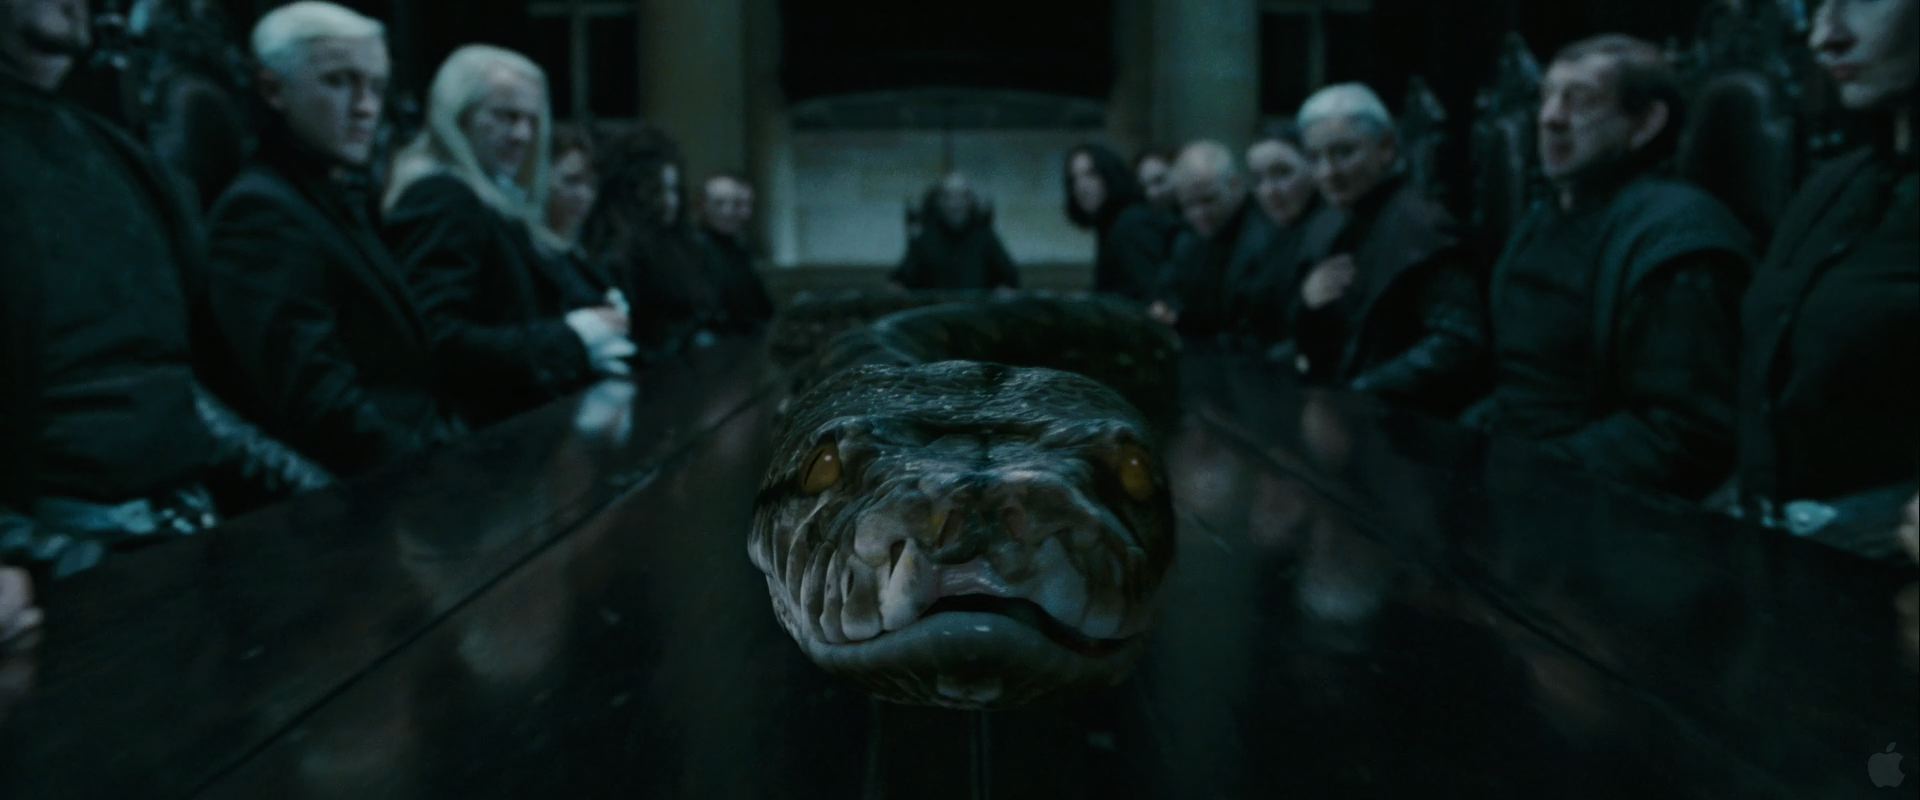 Lord Voldemorts Snake from Harry Potter and the Deathly Hallows